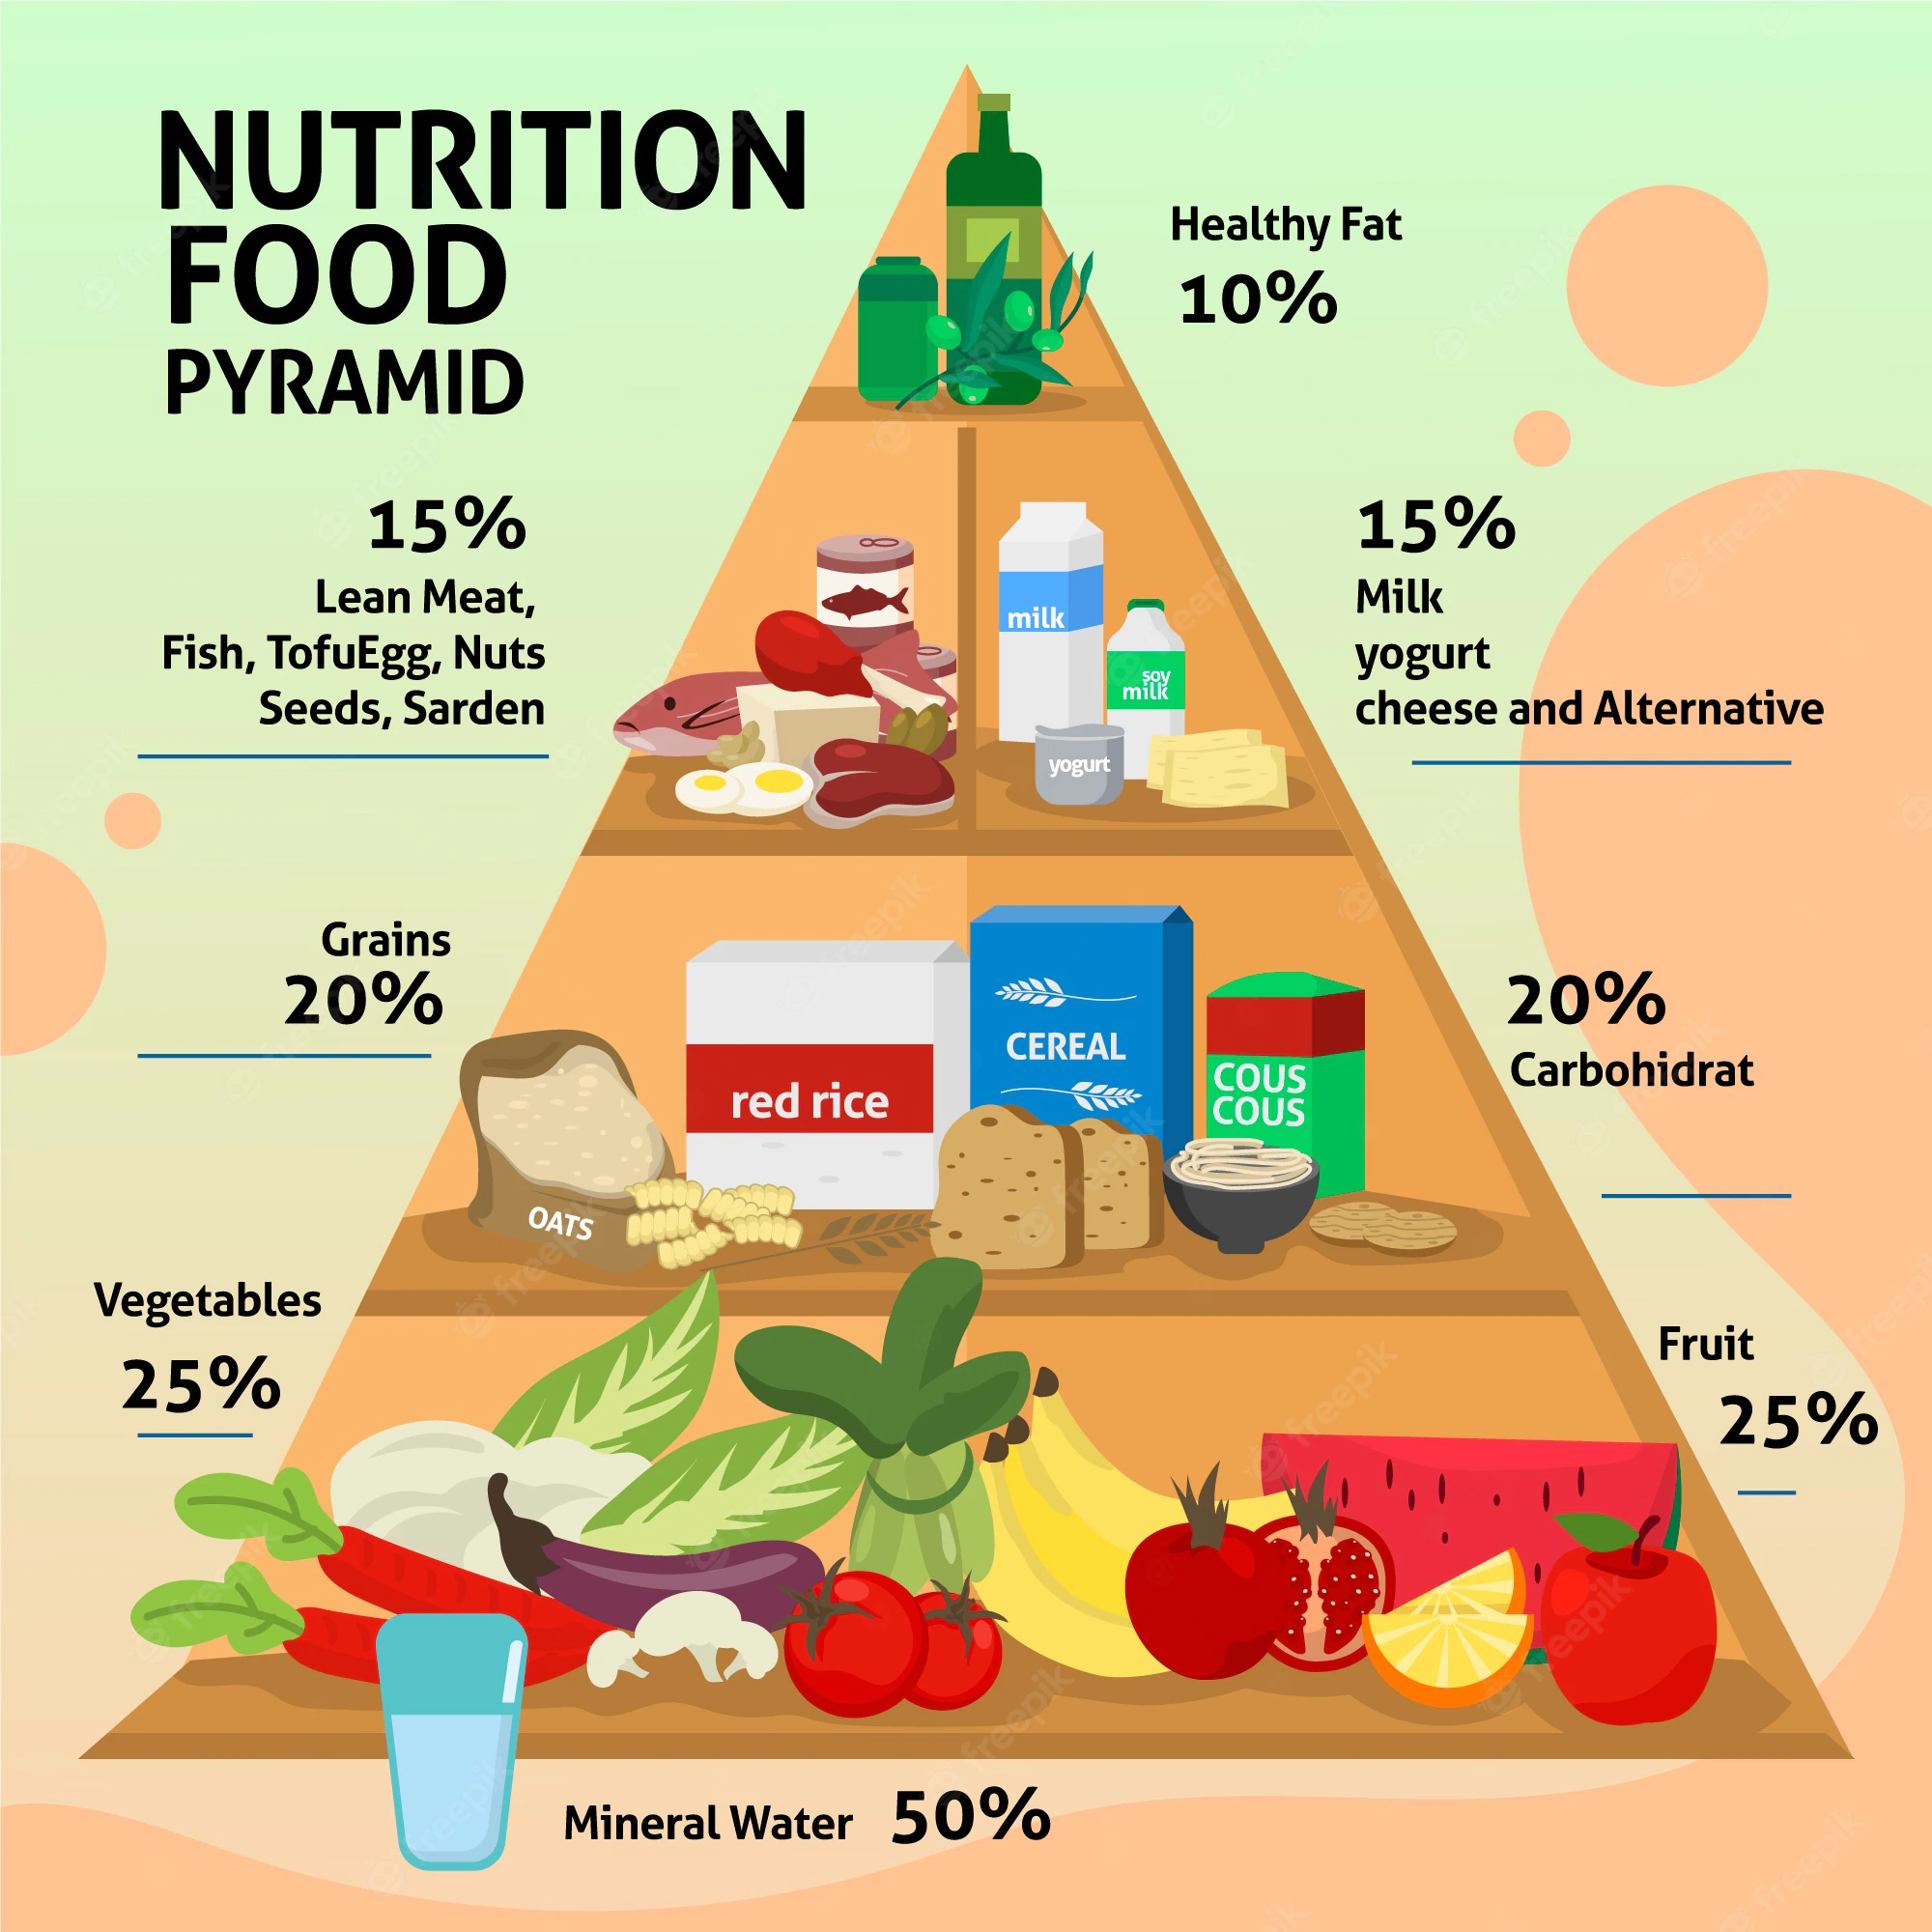 FOOD AND NUTRITION